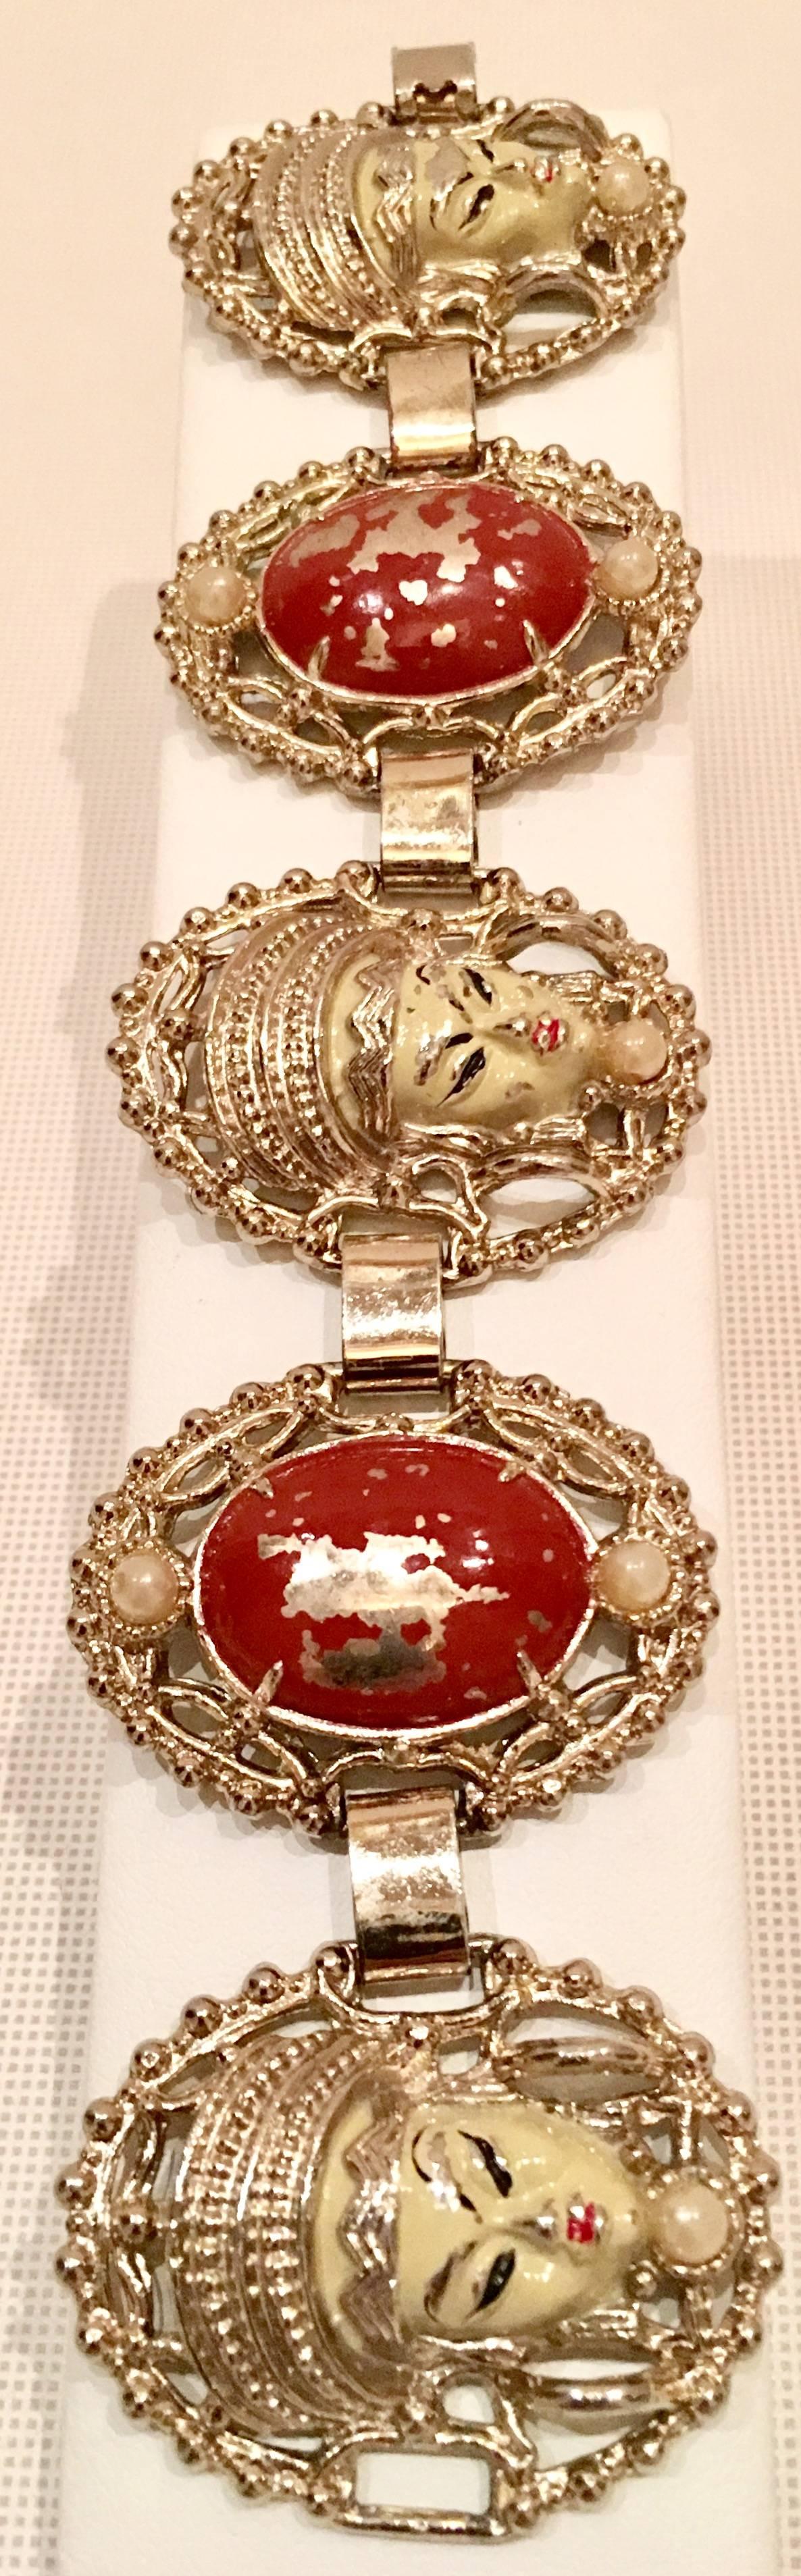 Mid-Century Selro style Asian Princess faux ivory and cinnabar gold plate five panel bracelet with a pair of ivory gold plate Asian Princess clip earrings. The Asian Princes collection is well know for being unsigned but no doubt identifiable as